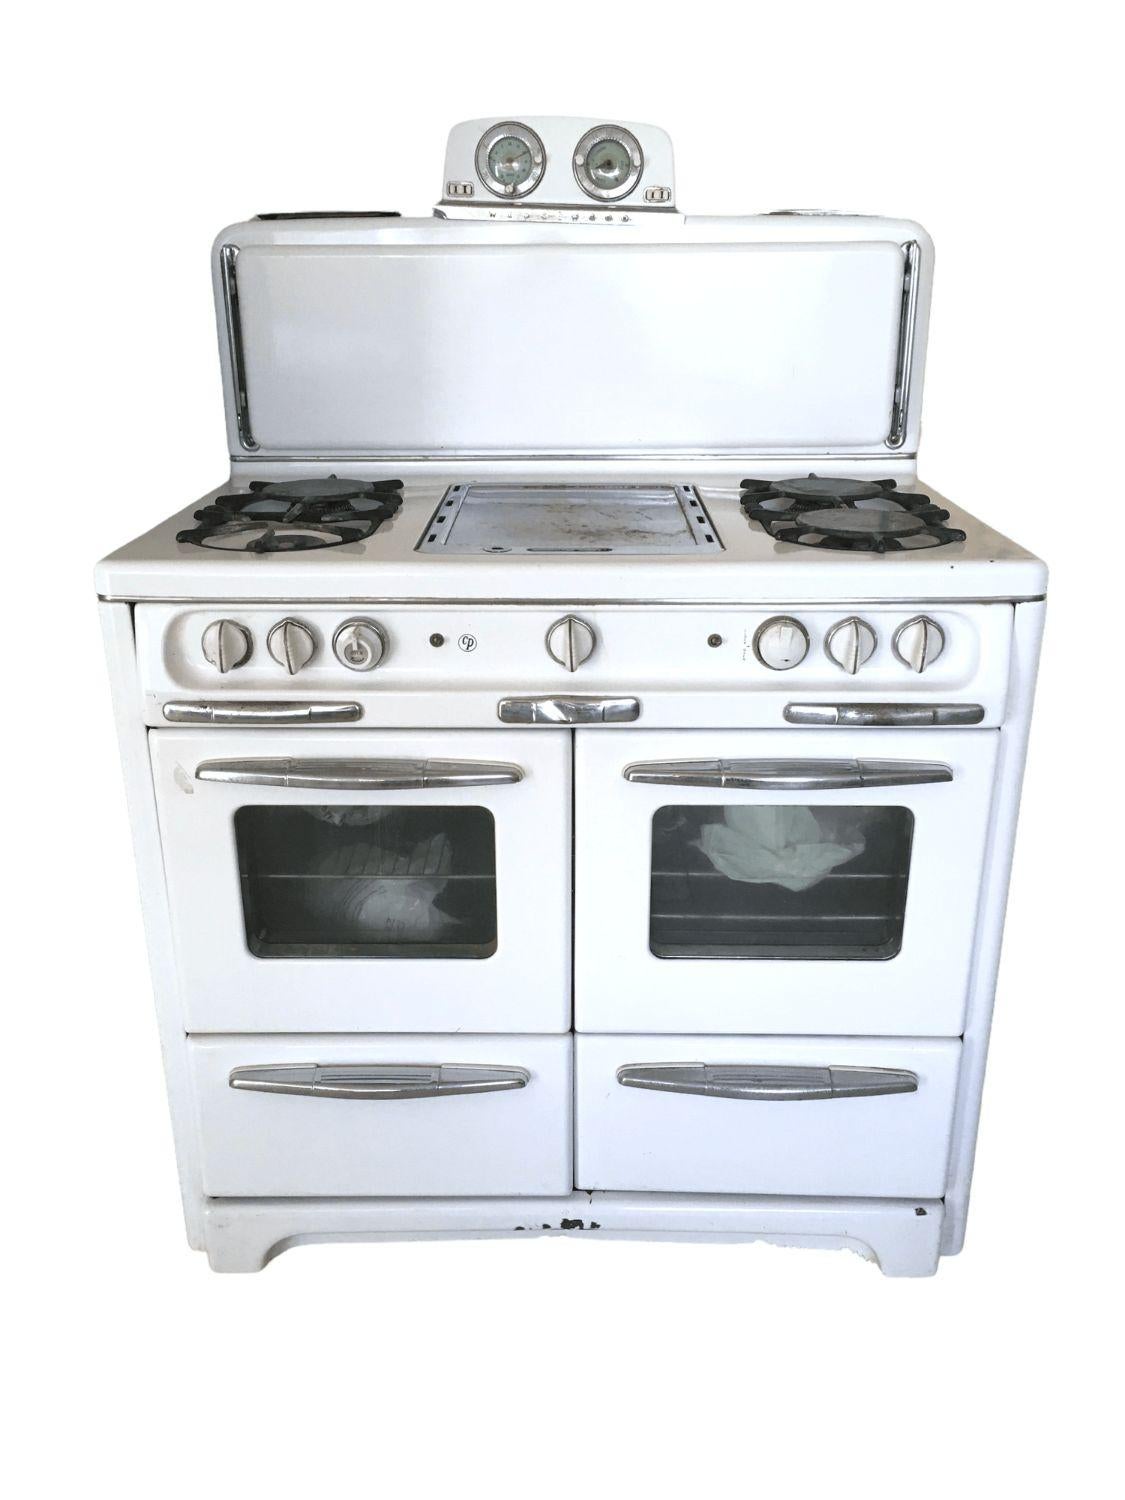 Vintage Wedgewood double oven stove in white. $2,200
 
This vintage stove features two ovens with windows in the doors, two Broilers, 4 Burners, Griddle, Bullet Light (tucked under the shelf), with Hinged Folding Shelf that keeps plates warm while